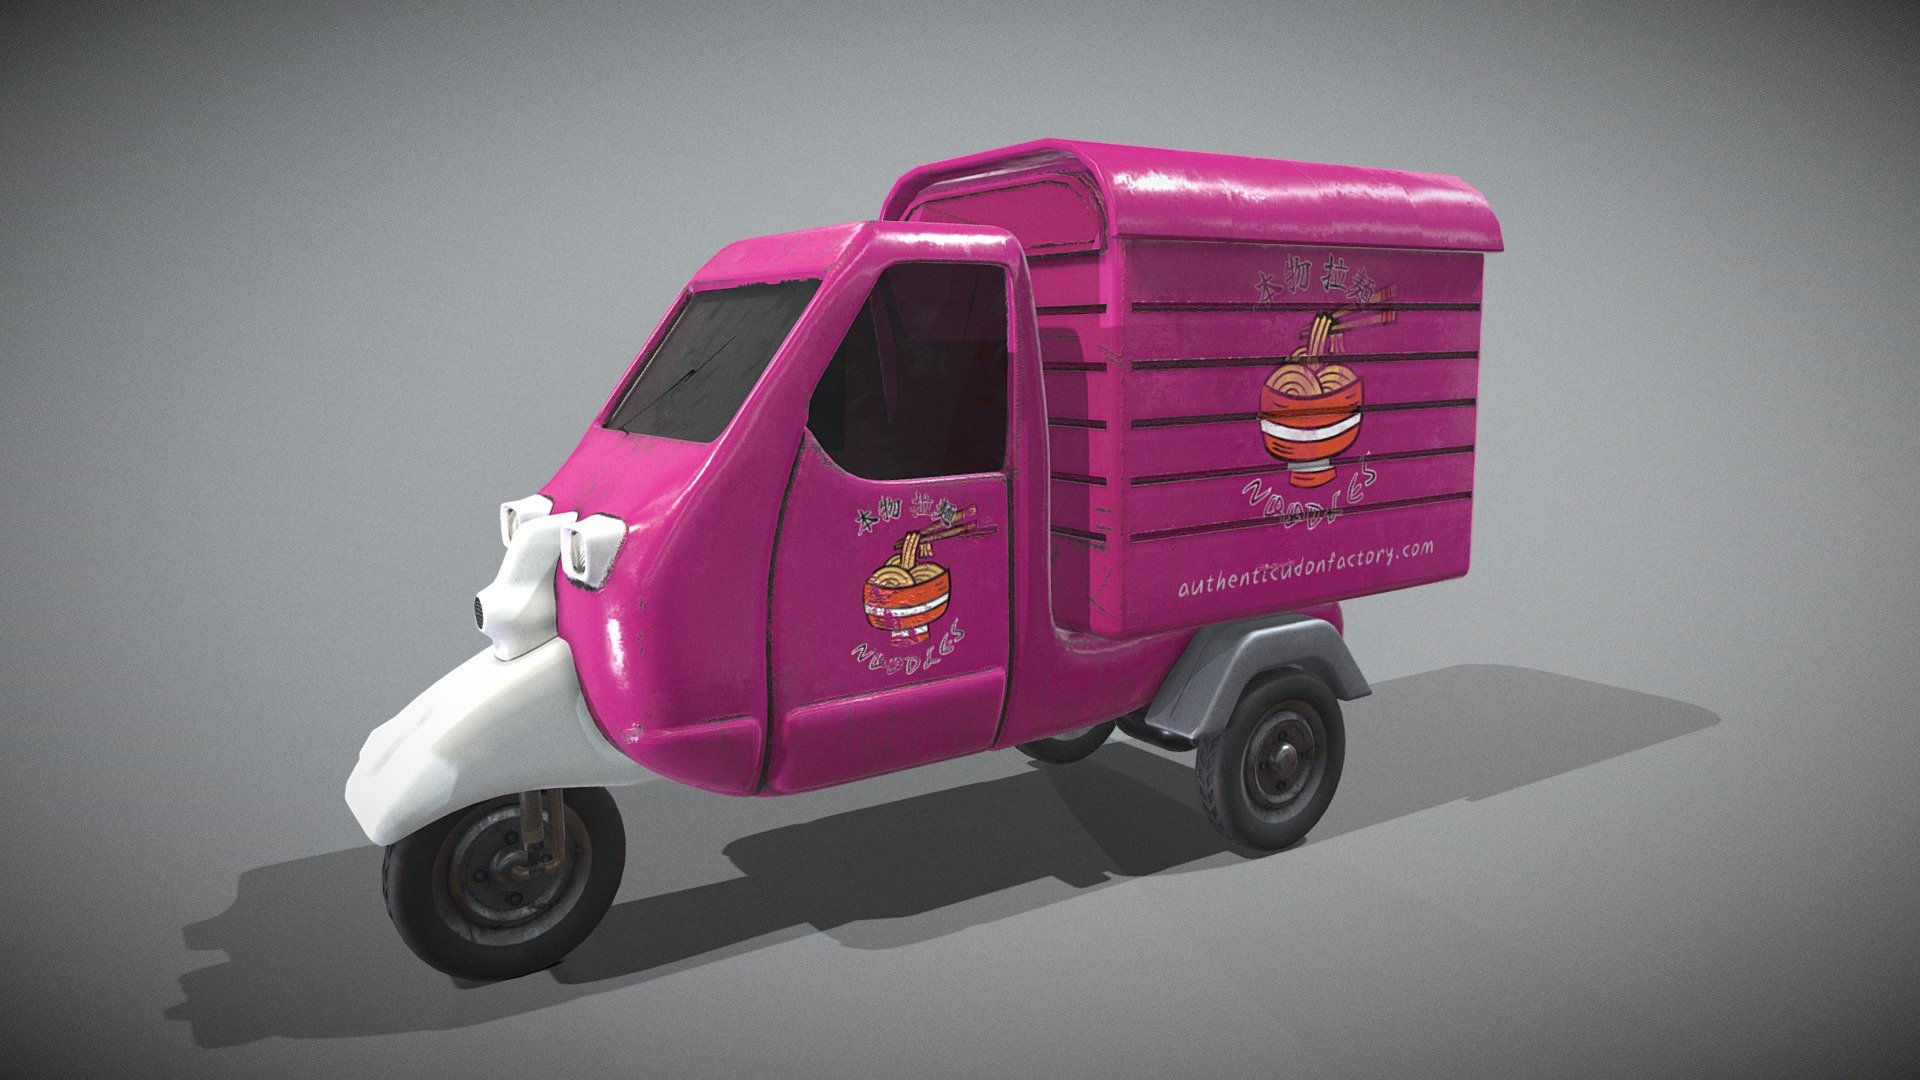 Cute little 3 wheeled Tuk Tuk Truck, cool prop for any of your scenes. 

All seperate meshes so you can move things around.  

The logo branding is made up but if you want something particular let me know, i can stlyle it however 

Comes with 4K PBR textures 3d model